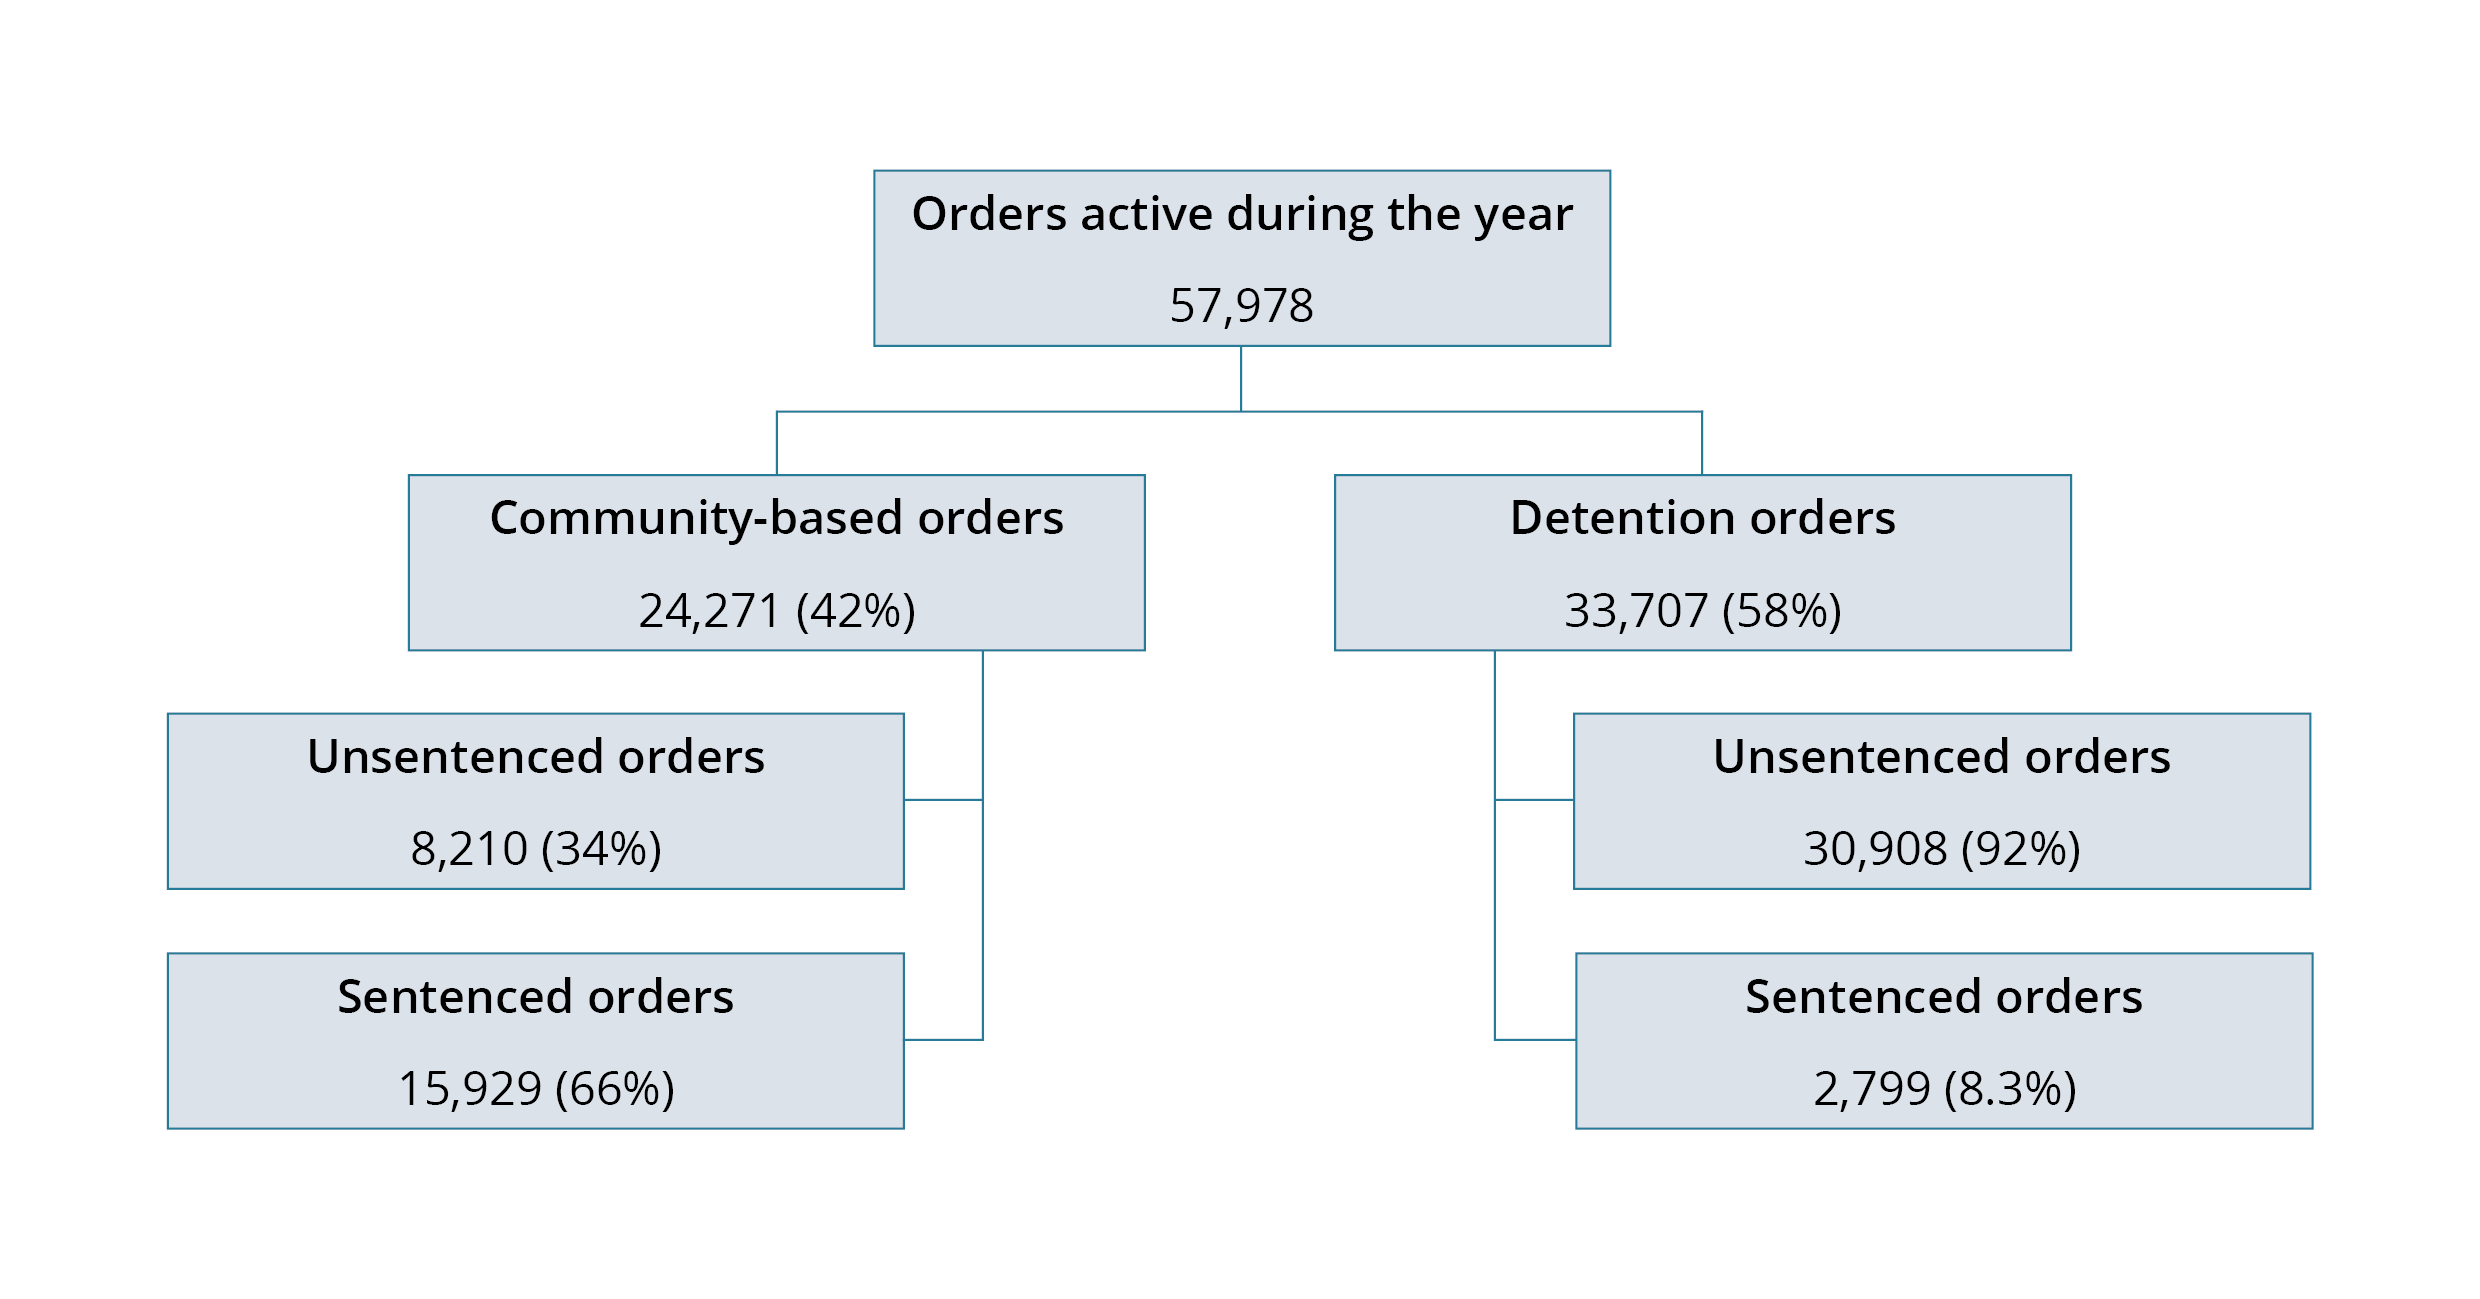 This flow chart shows the number of orders active during the year (57,978) by type of order (community-based supervision; detention), which is further split by legal status (sentenced; unsentenced).